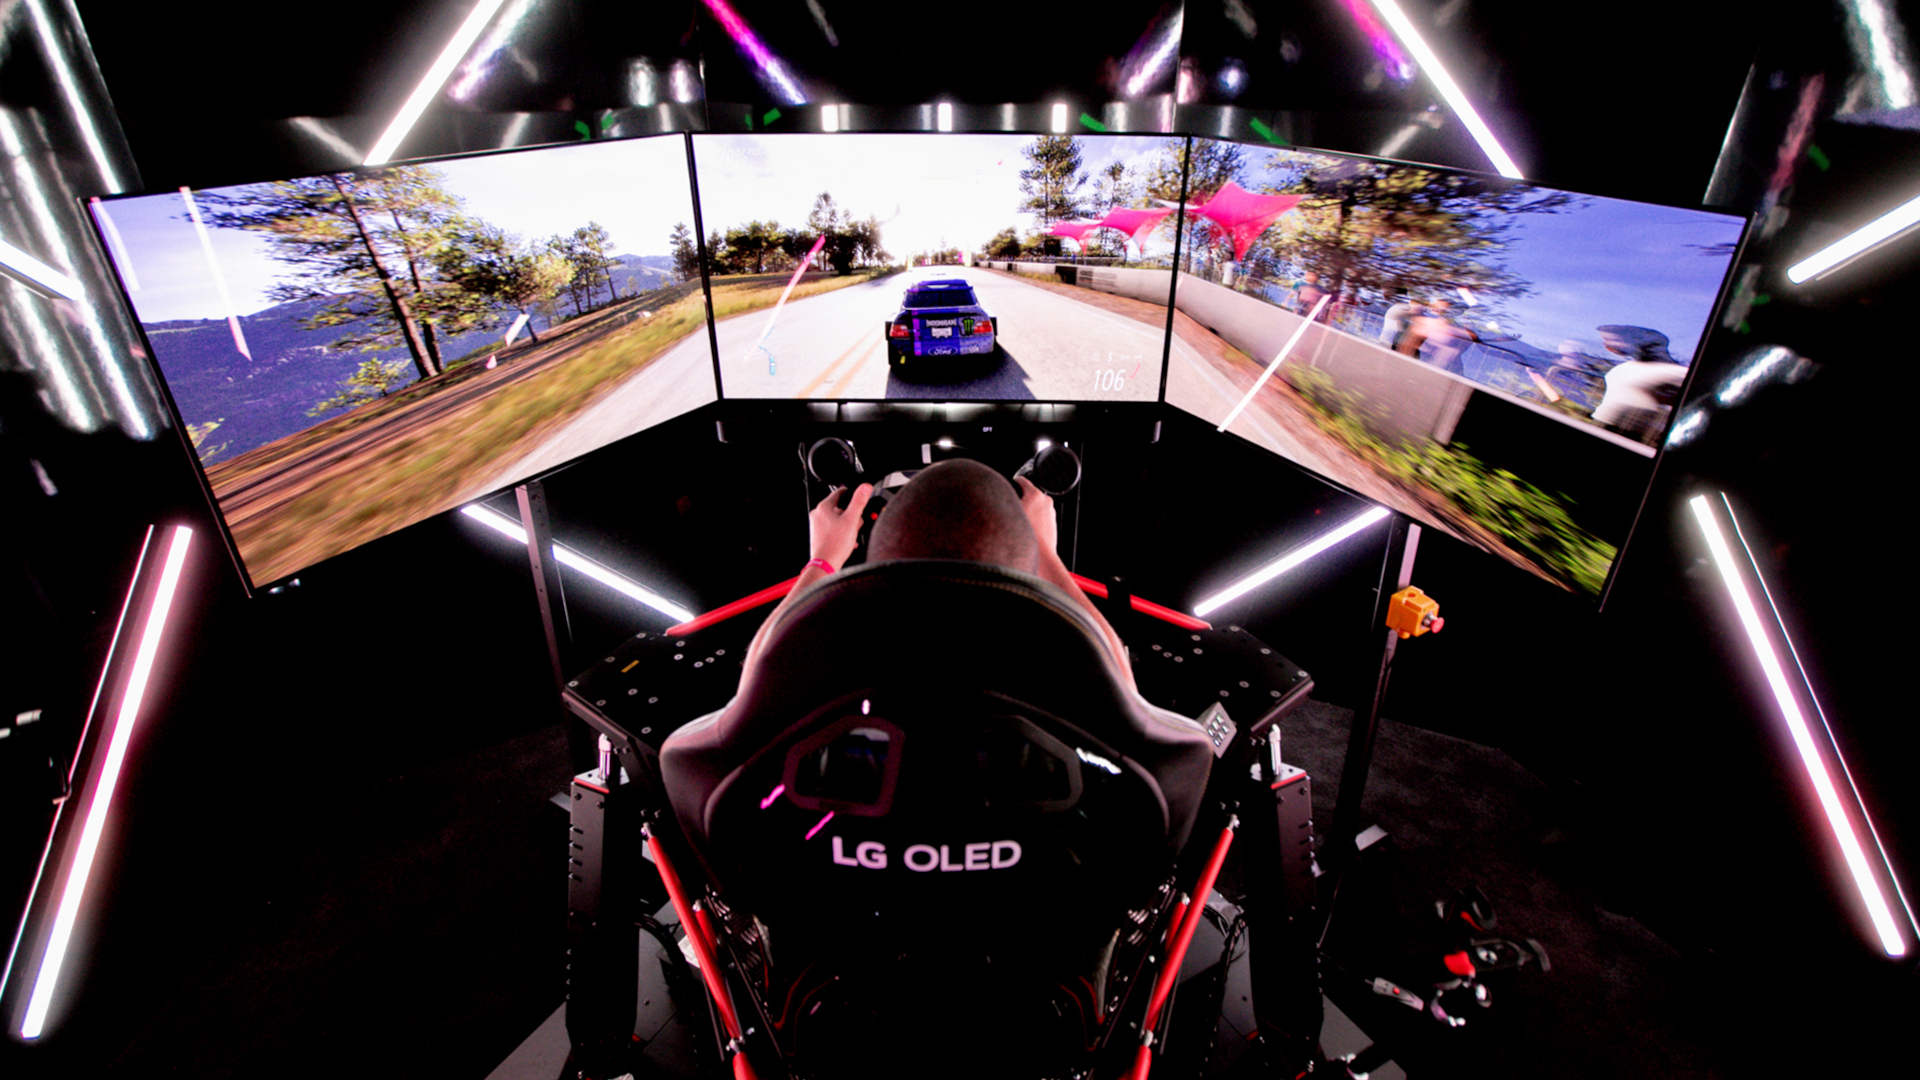 LG and Xbox team up to create the ultimate Forza Horizon 5 OLED gaming PC setup